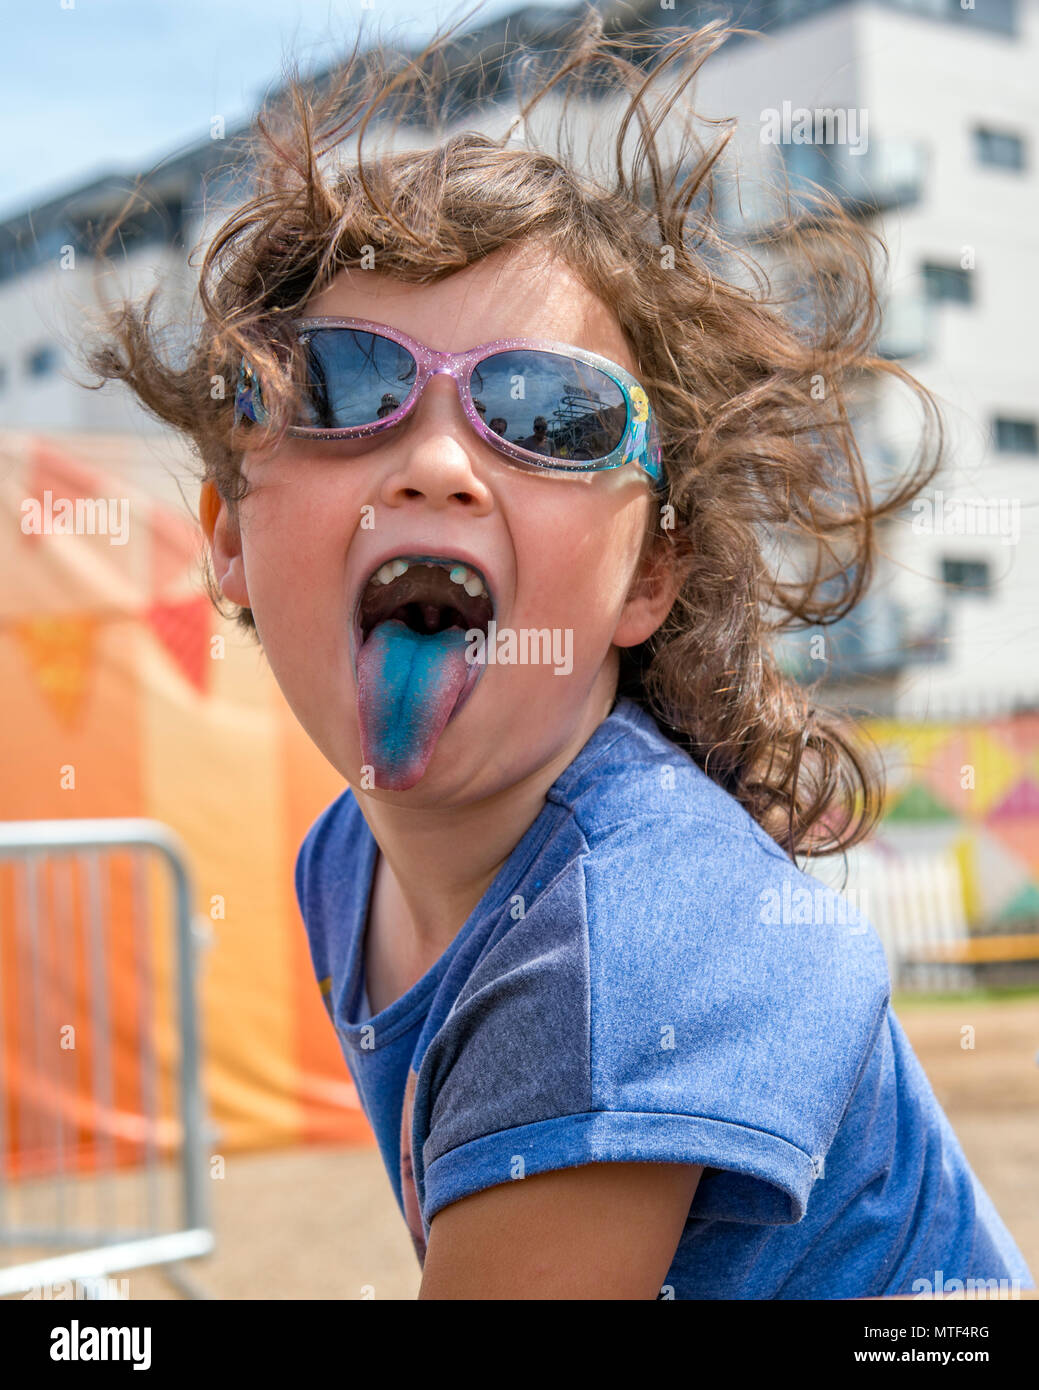 Cheeky young girl poking out her blue tongue coloured by an ice lolly Stock Photo